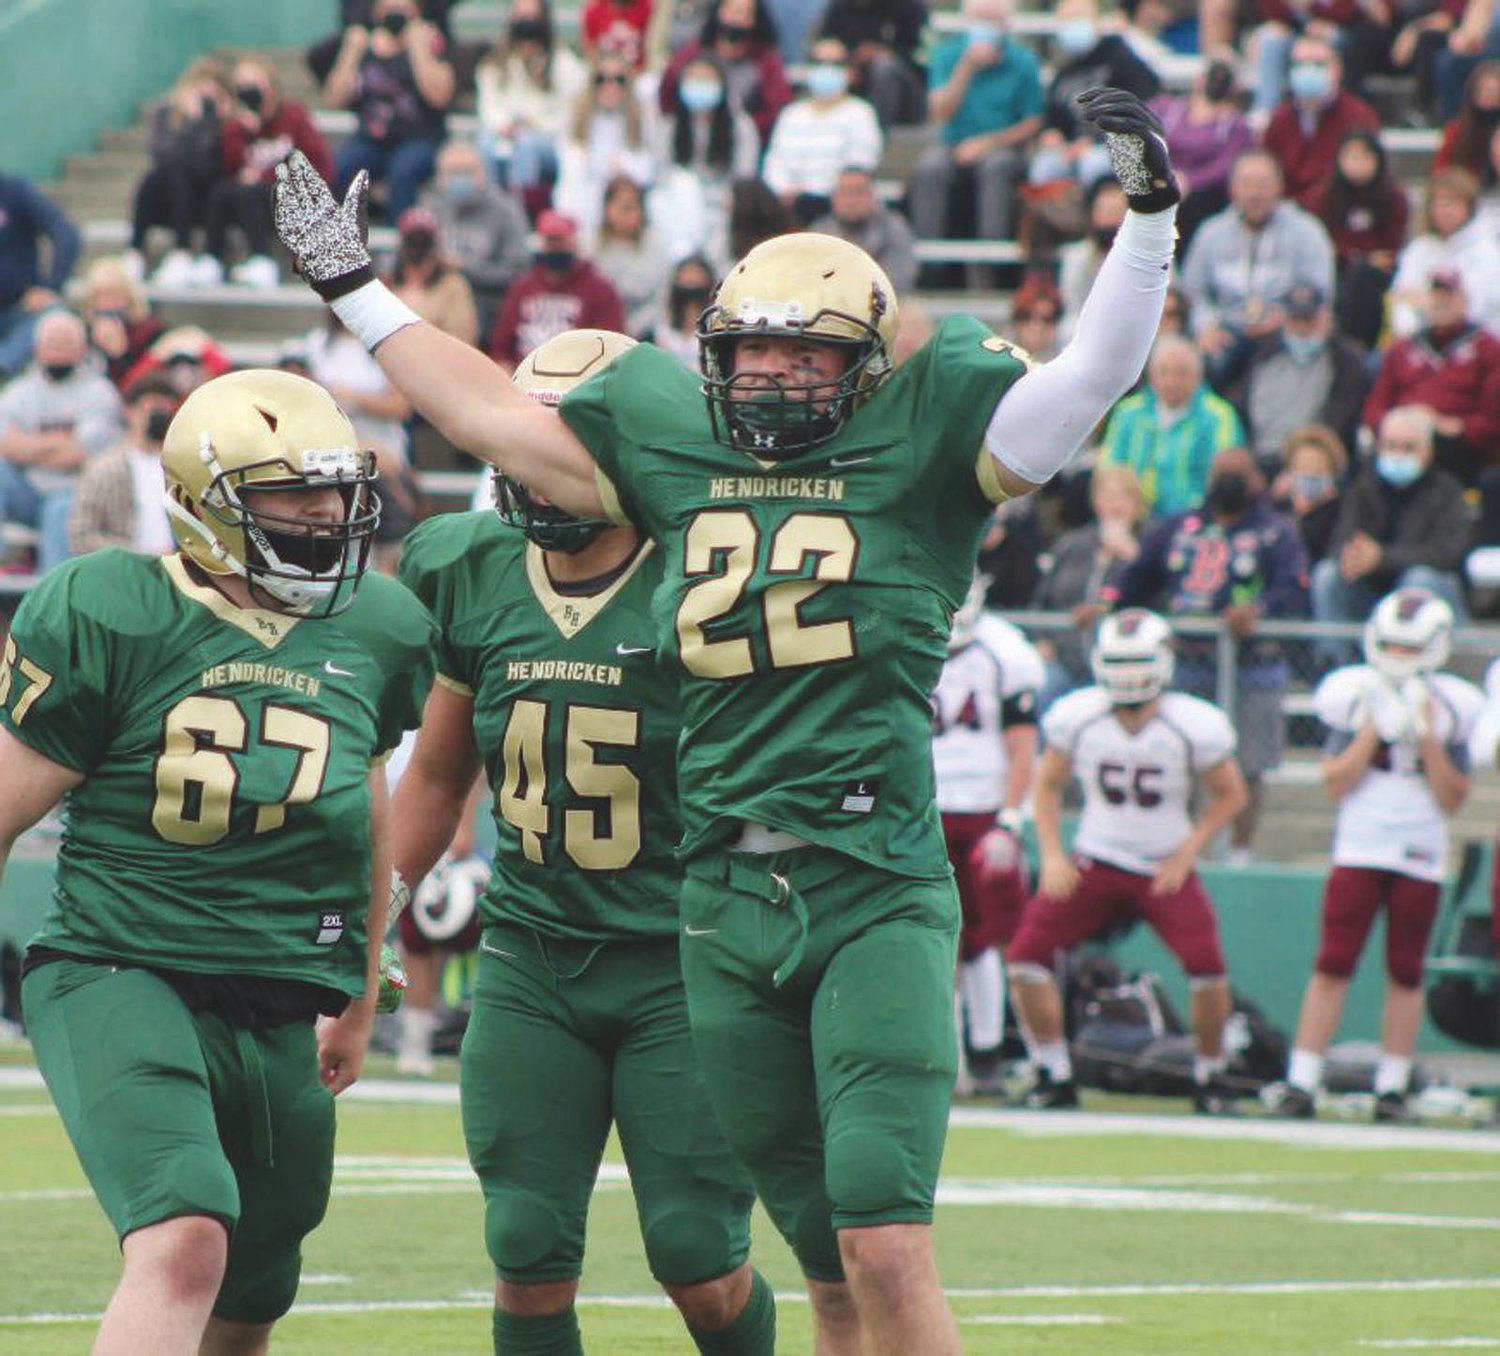 BACK ON TOP: Luke Mead celebrates making a play.